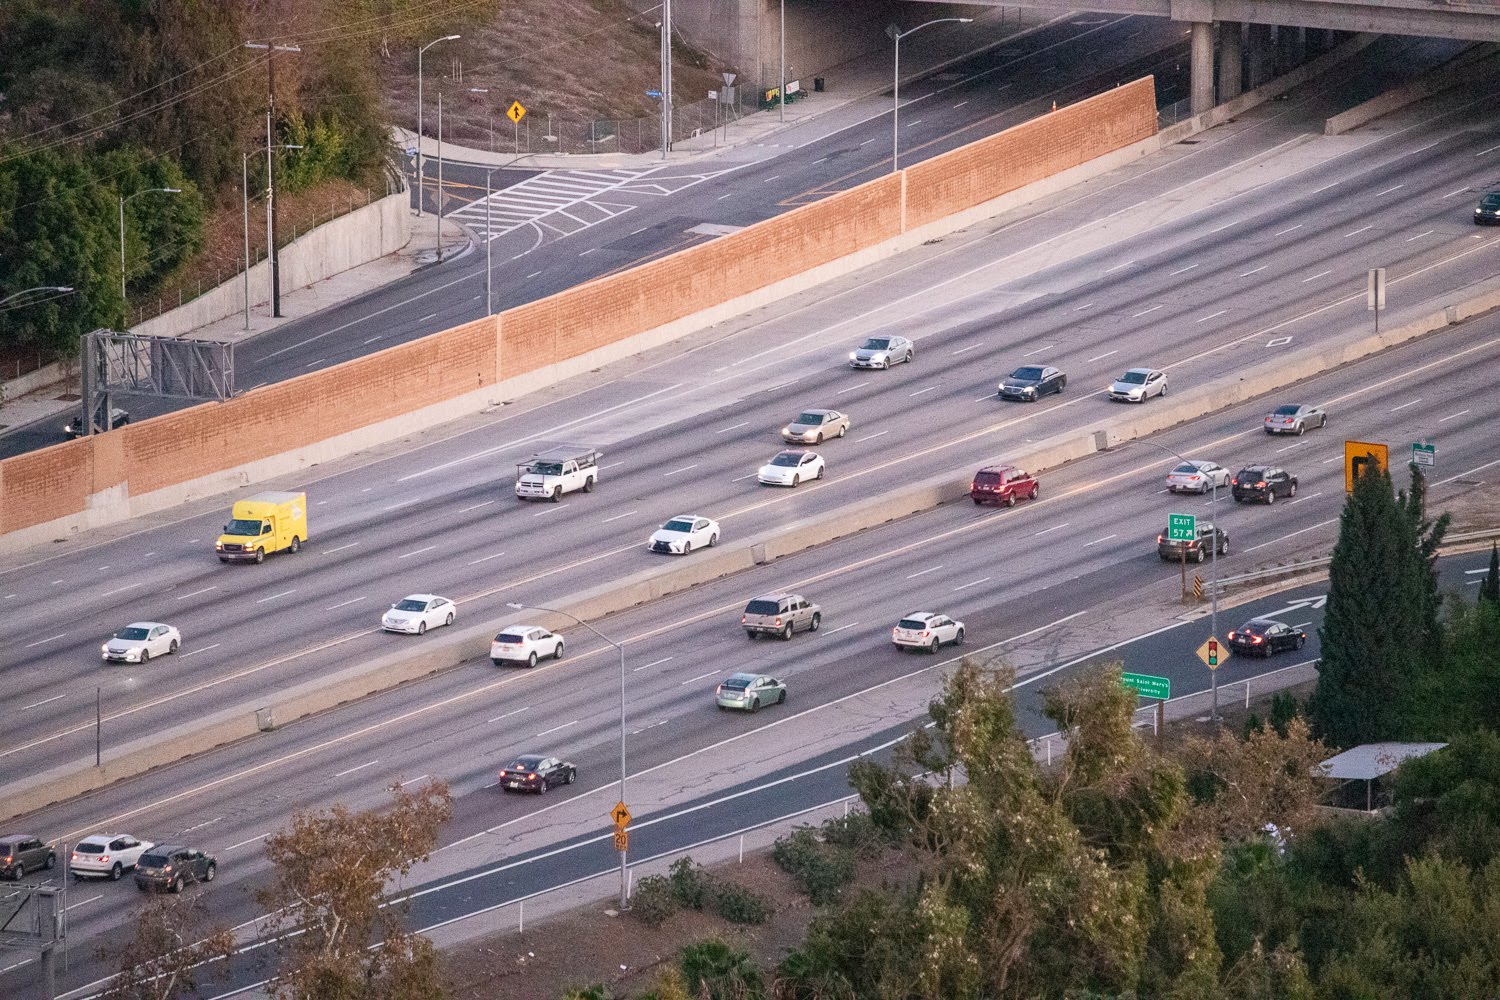 3/18 Los Angeles, CA – Injuries Reported in Car Accident on SR-91 Near Imperial Hwy